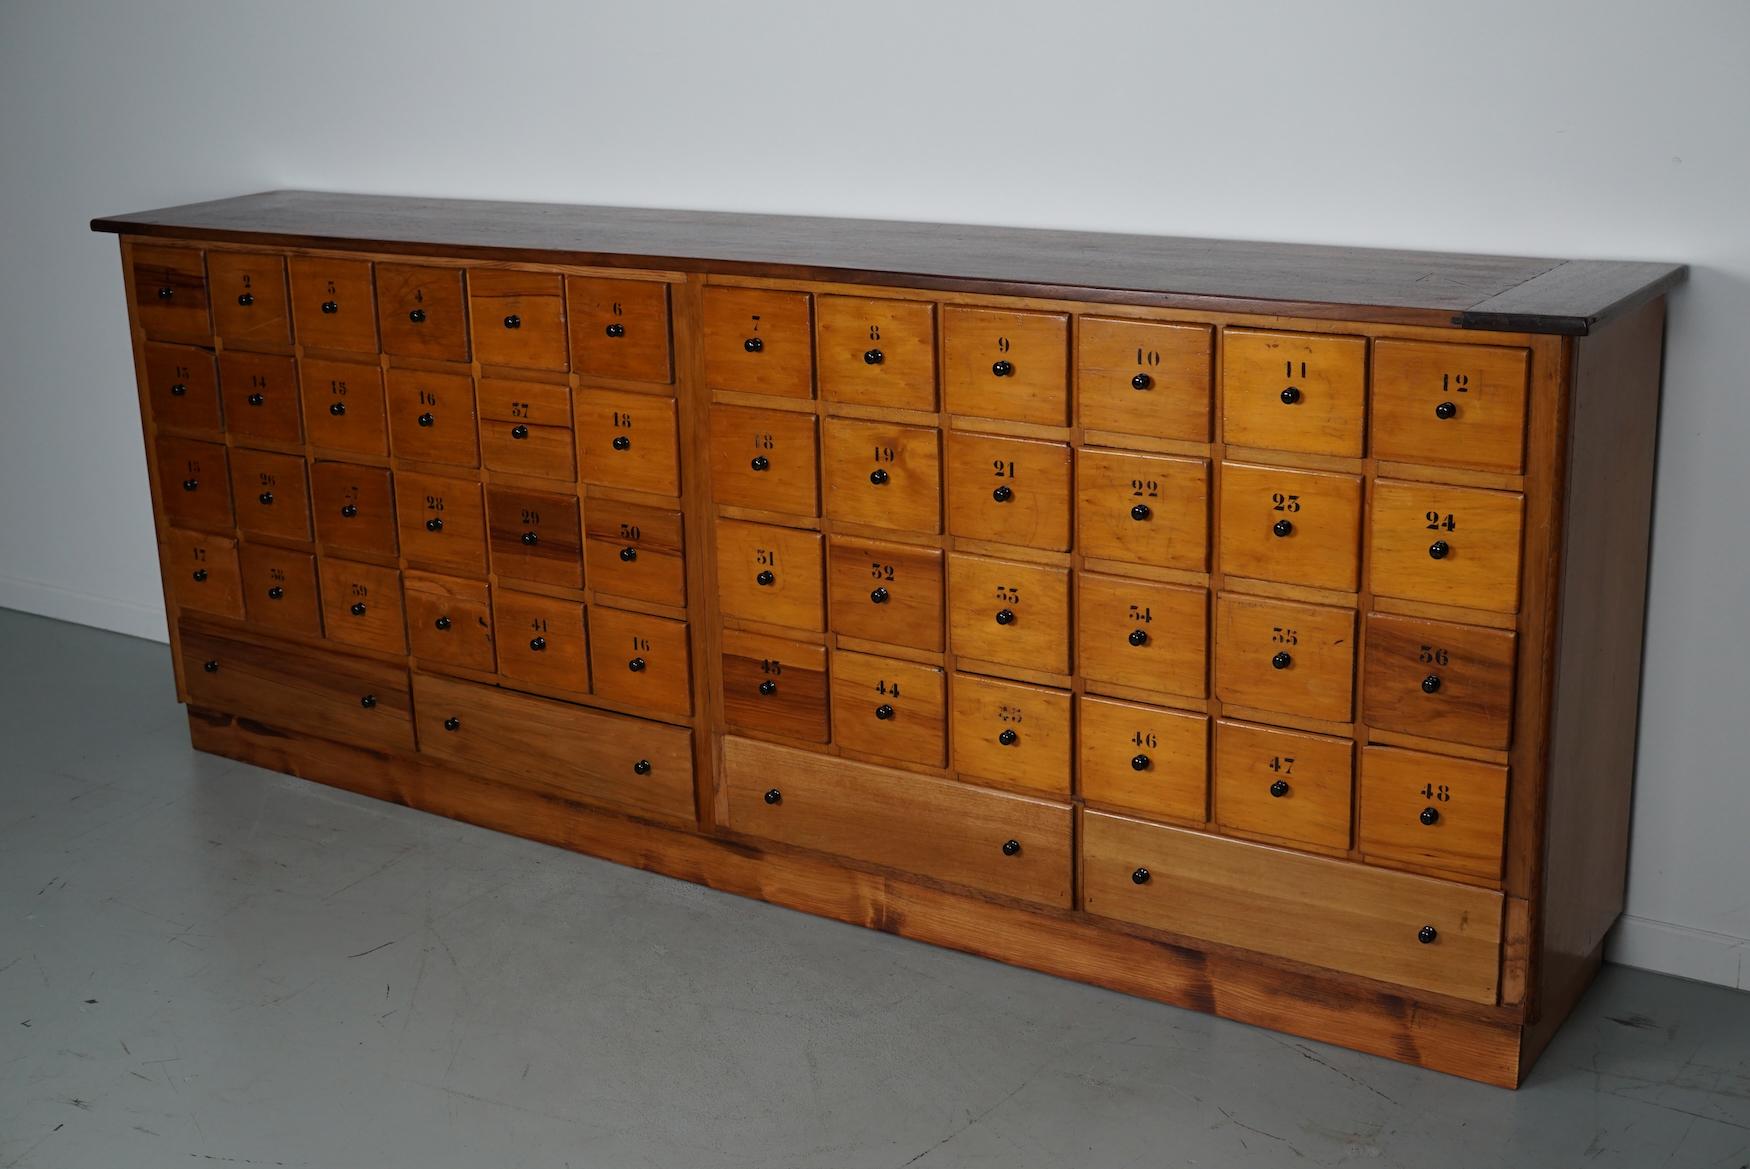 This apothecary bank of drawers was designed and made circa 1950 in the Netherlands. It was made from beech and it features 52 drawers with black metal knobs and numbers. The interior dimensions of the drawers are: DWH 33 x 14.5 and 52 x 13 cm.